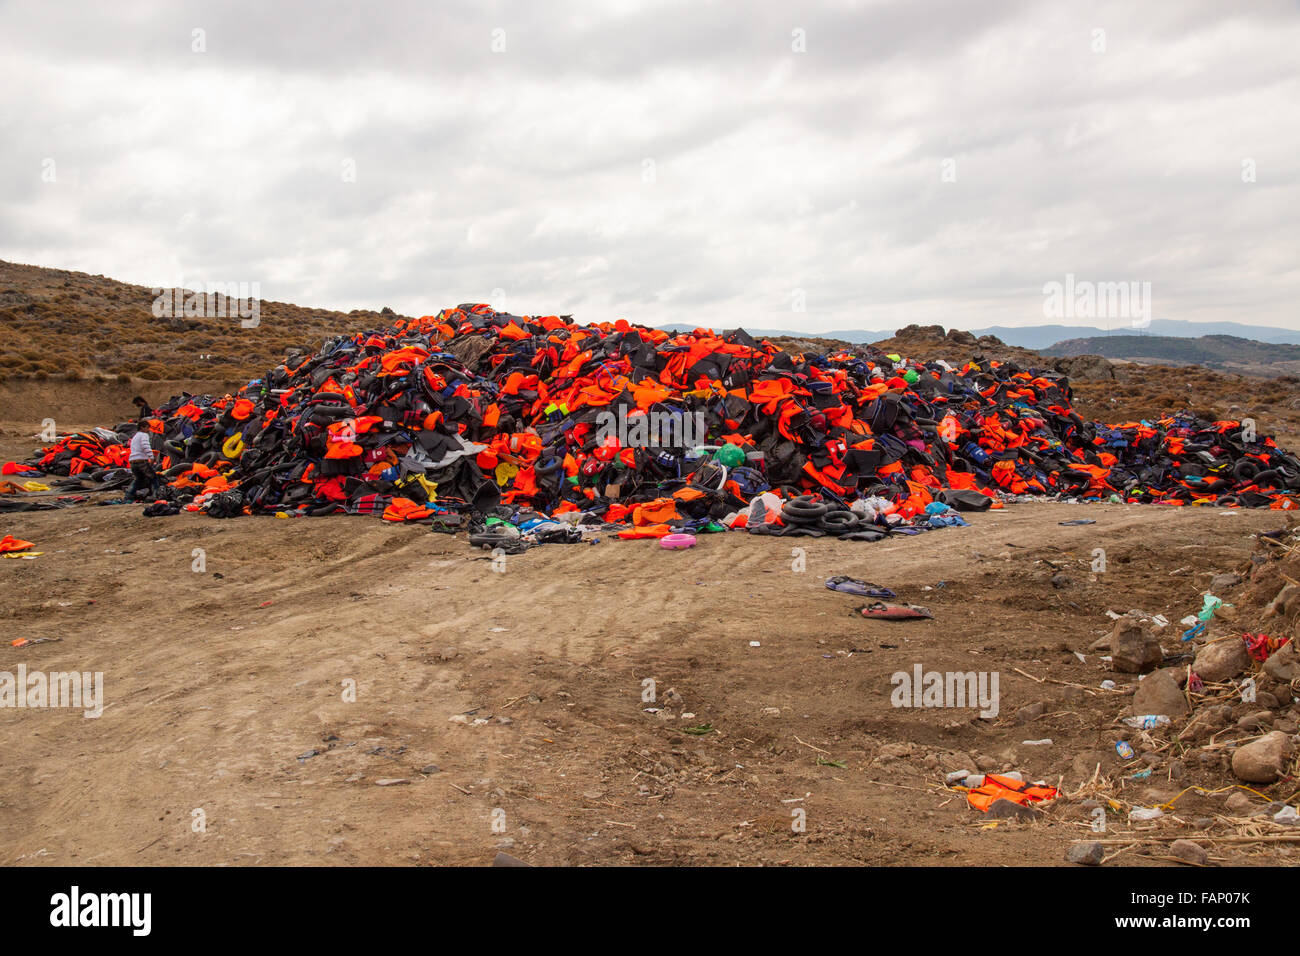 cleaning up discarded  life jackets after the arrival of refugees asylum seekers and immigrants on the island of Lesbos Greece by inflatable boats Stock Photo